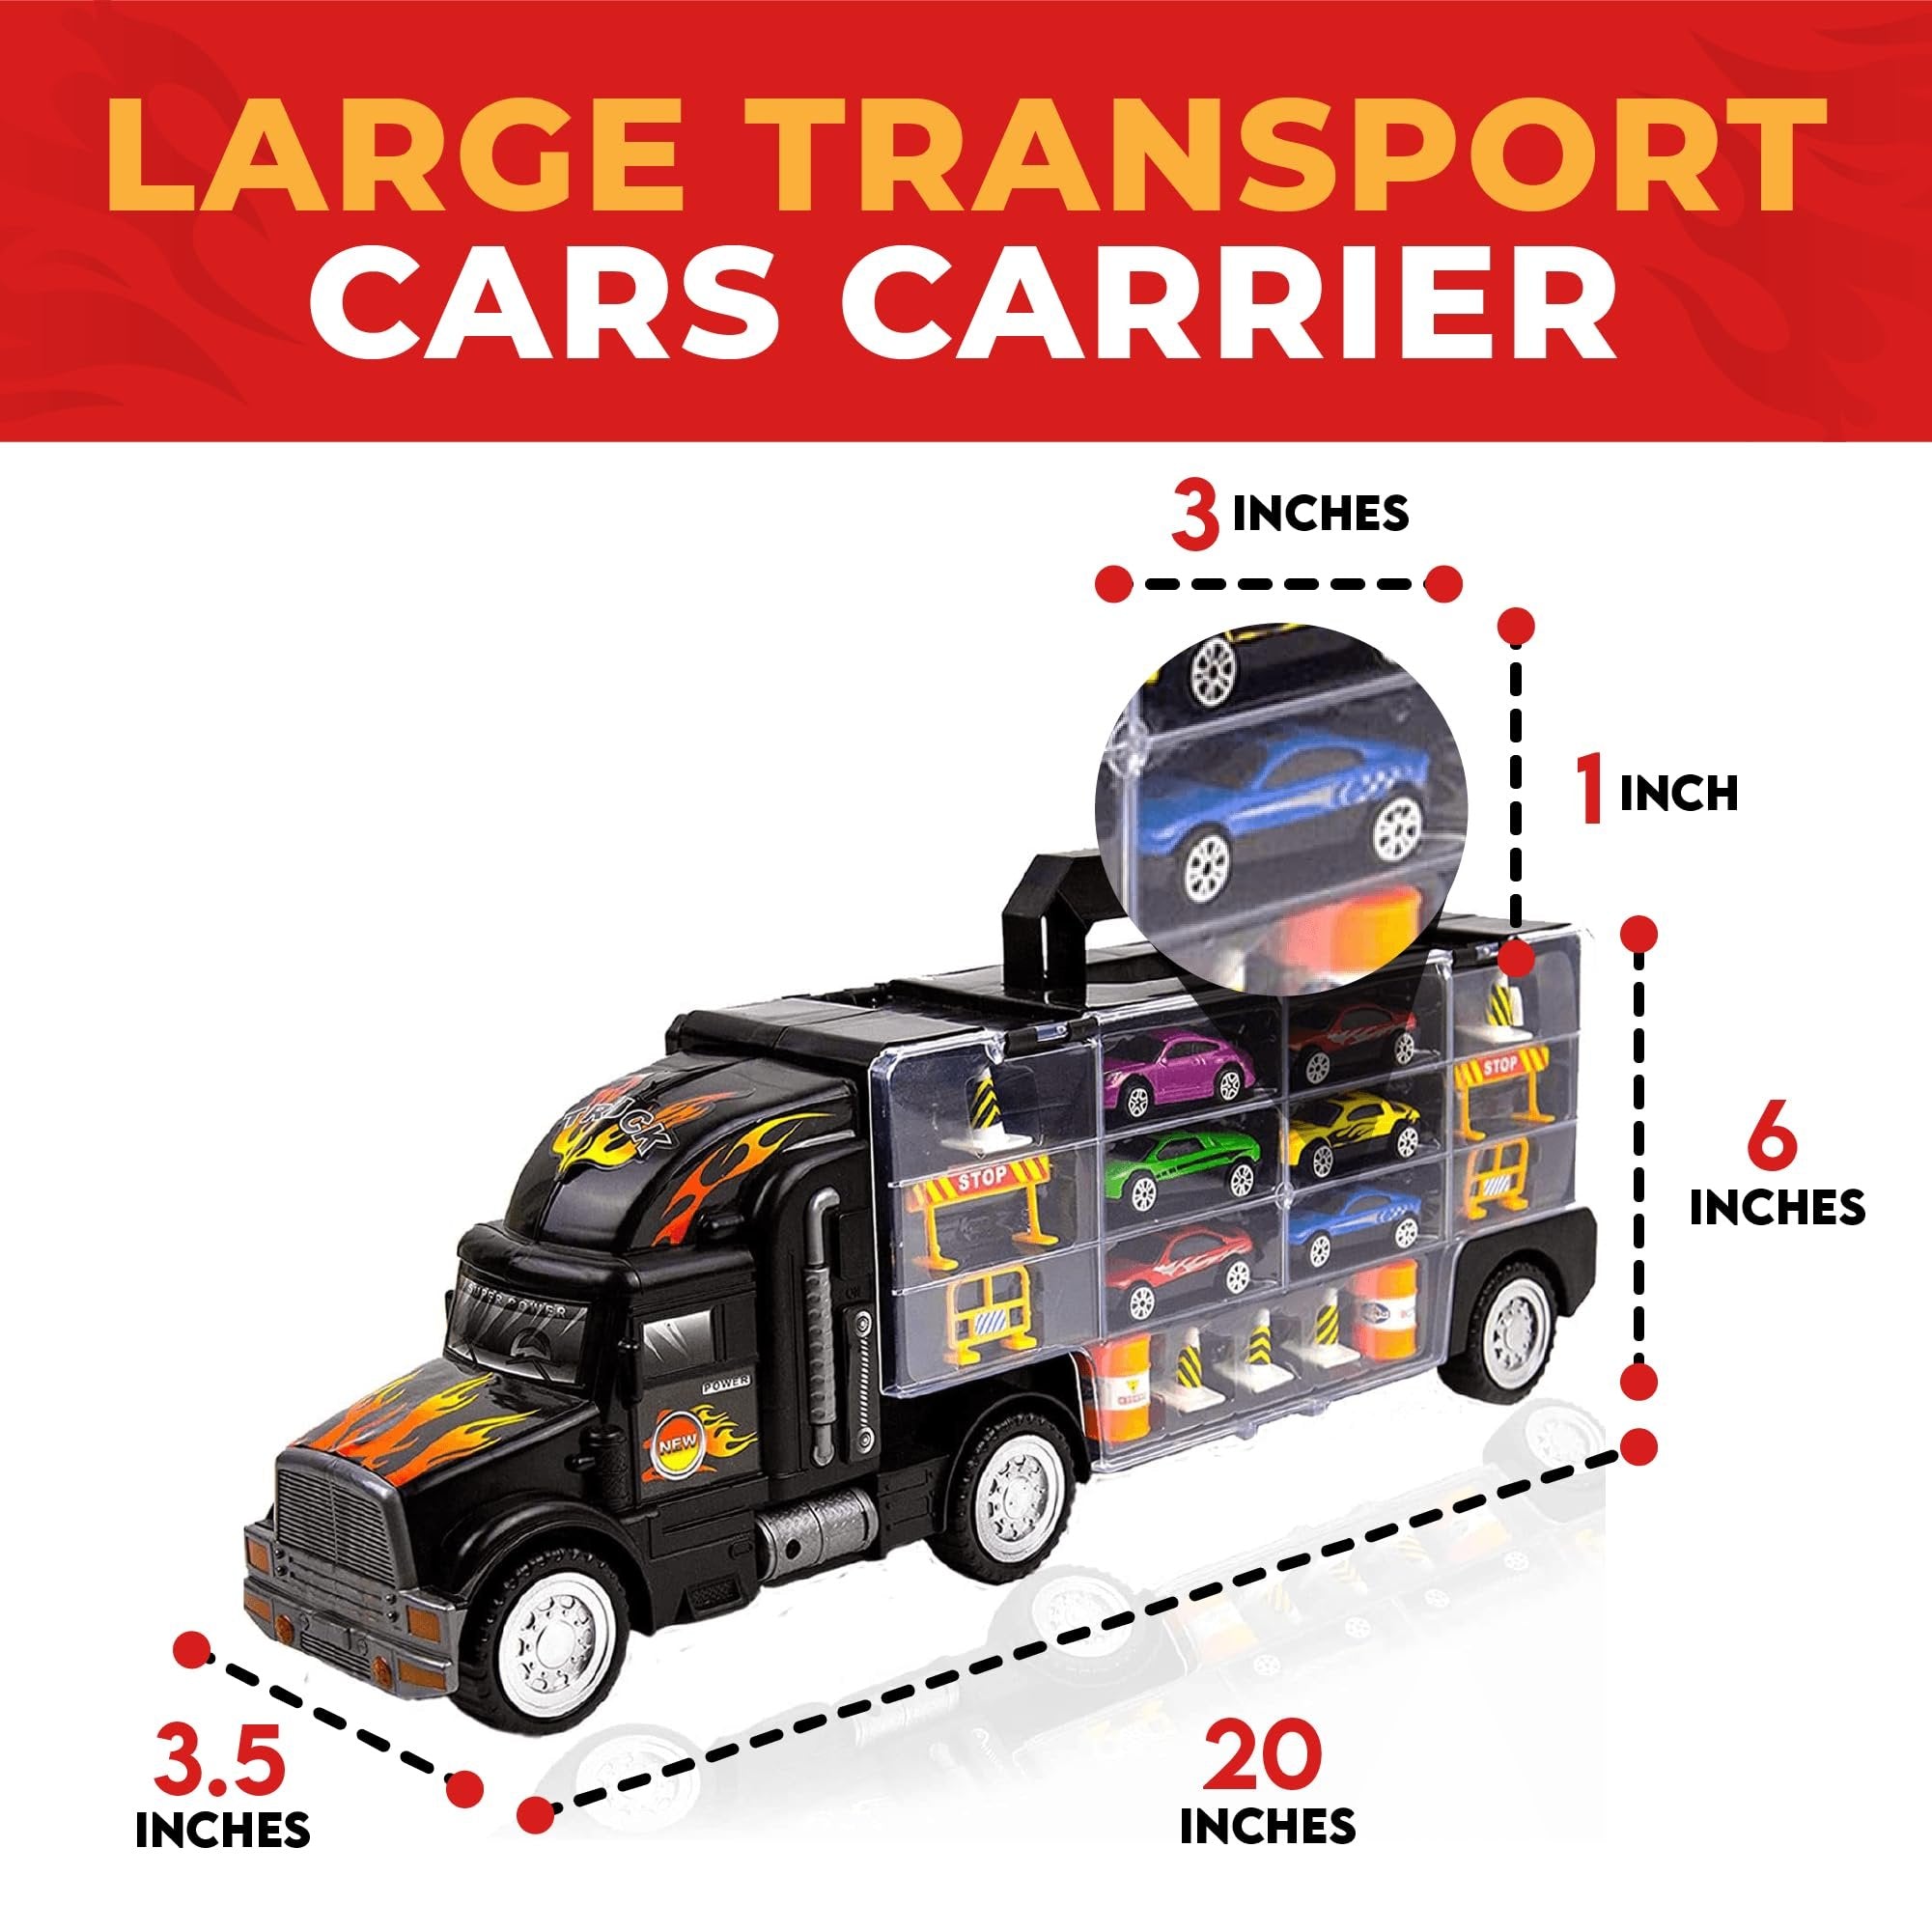 Wolvolk Transport Car Carrier Truck Toy - Car Transporter Carrier Truck Car Set- Toy Car Storage Organizer - Car Carriers Toy Trucks for Boys Age 4-7 with 6 Matchbox Cars, Construction Signs and Cones